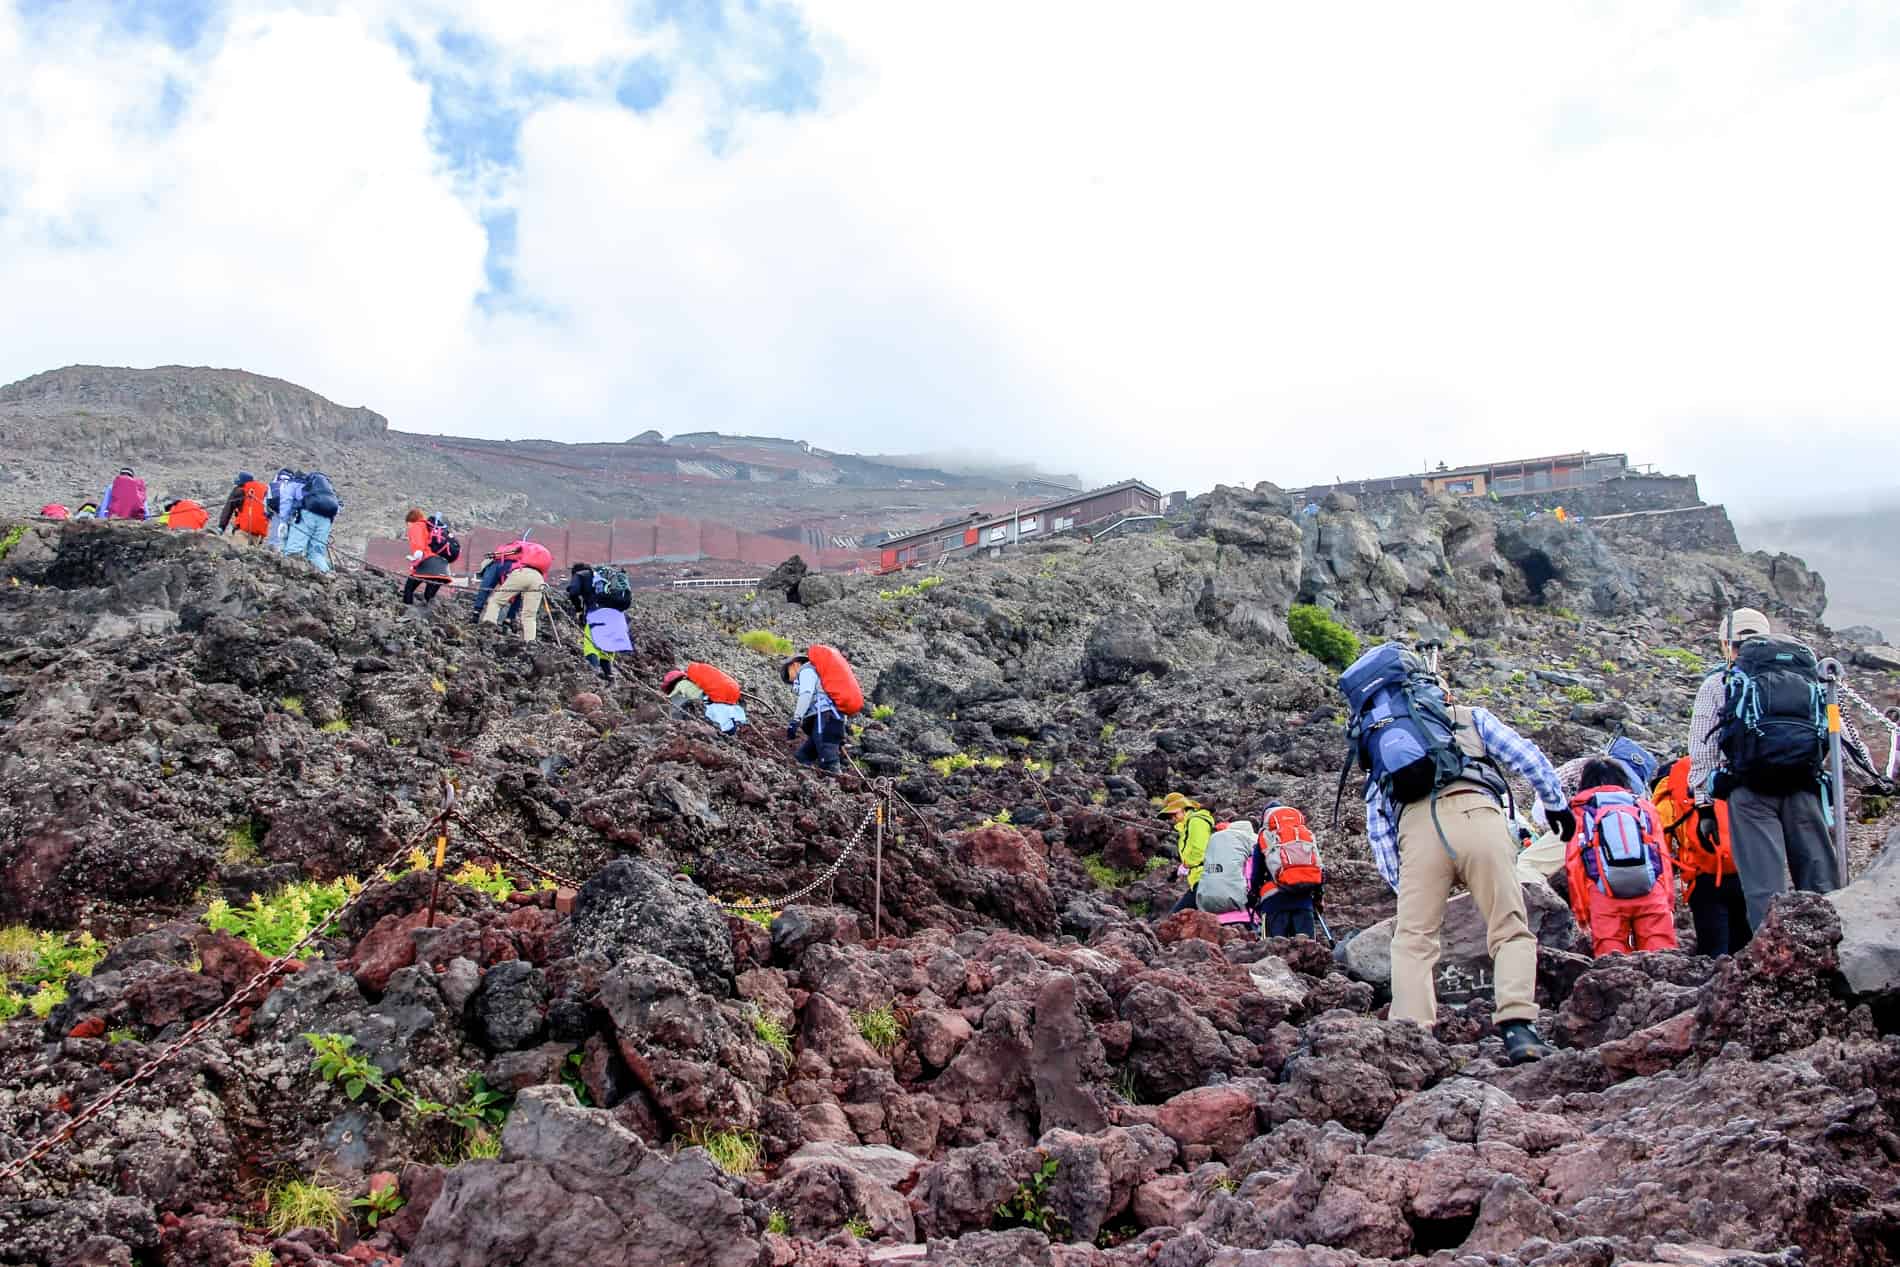 Hikers in colours clothing and trekking gear walking up the dense rocky paths on Mt Fuji in Japan.